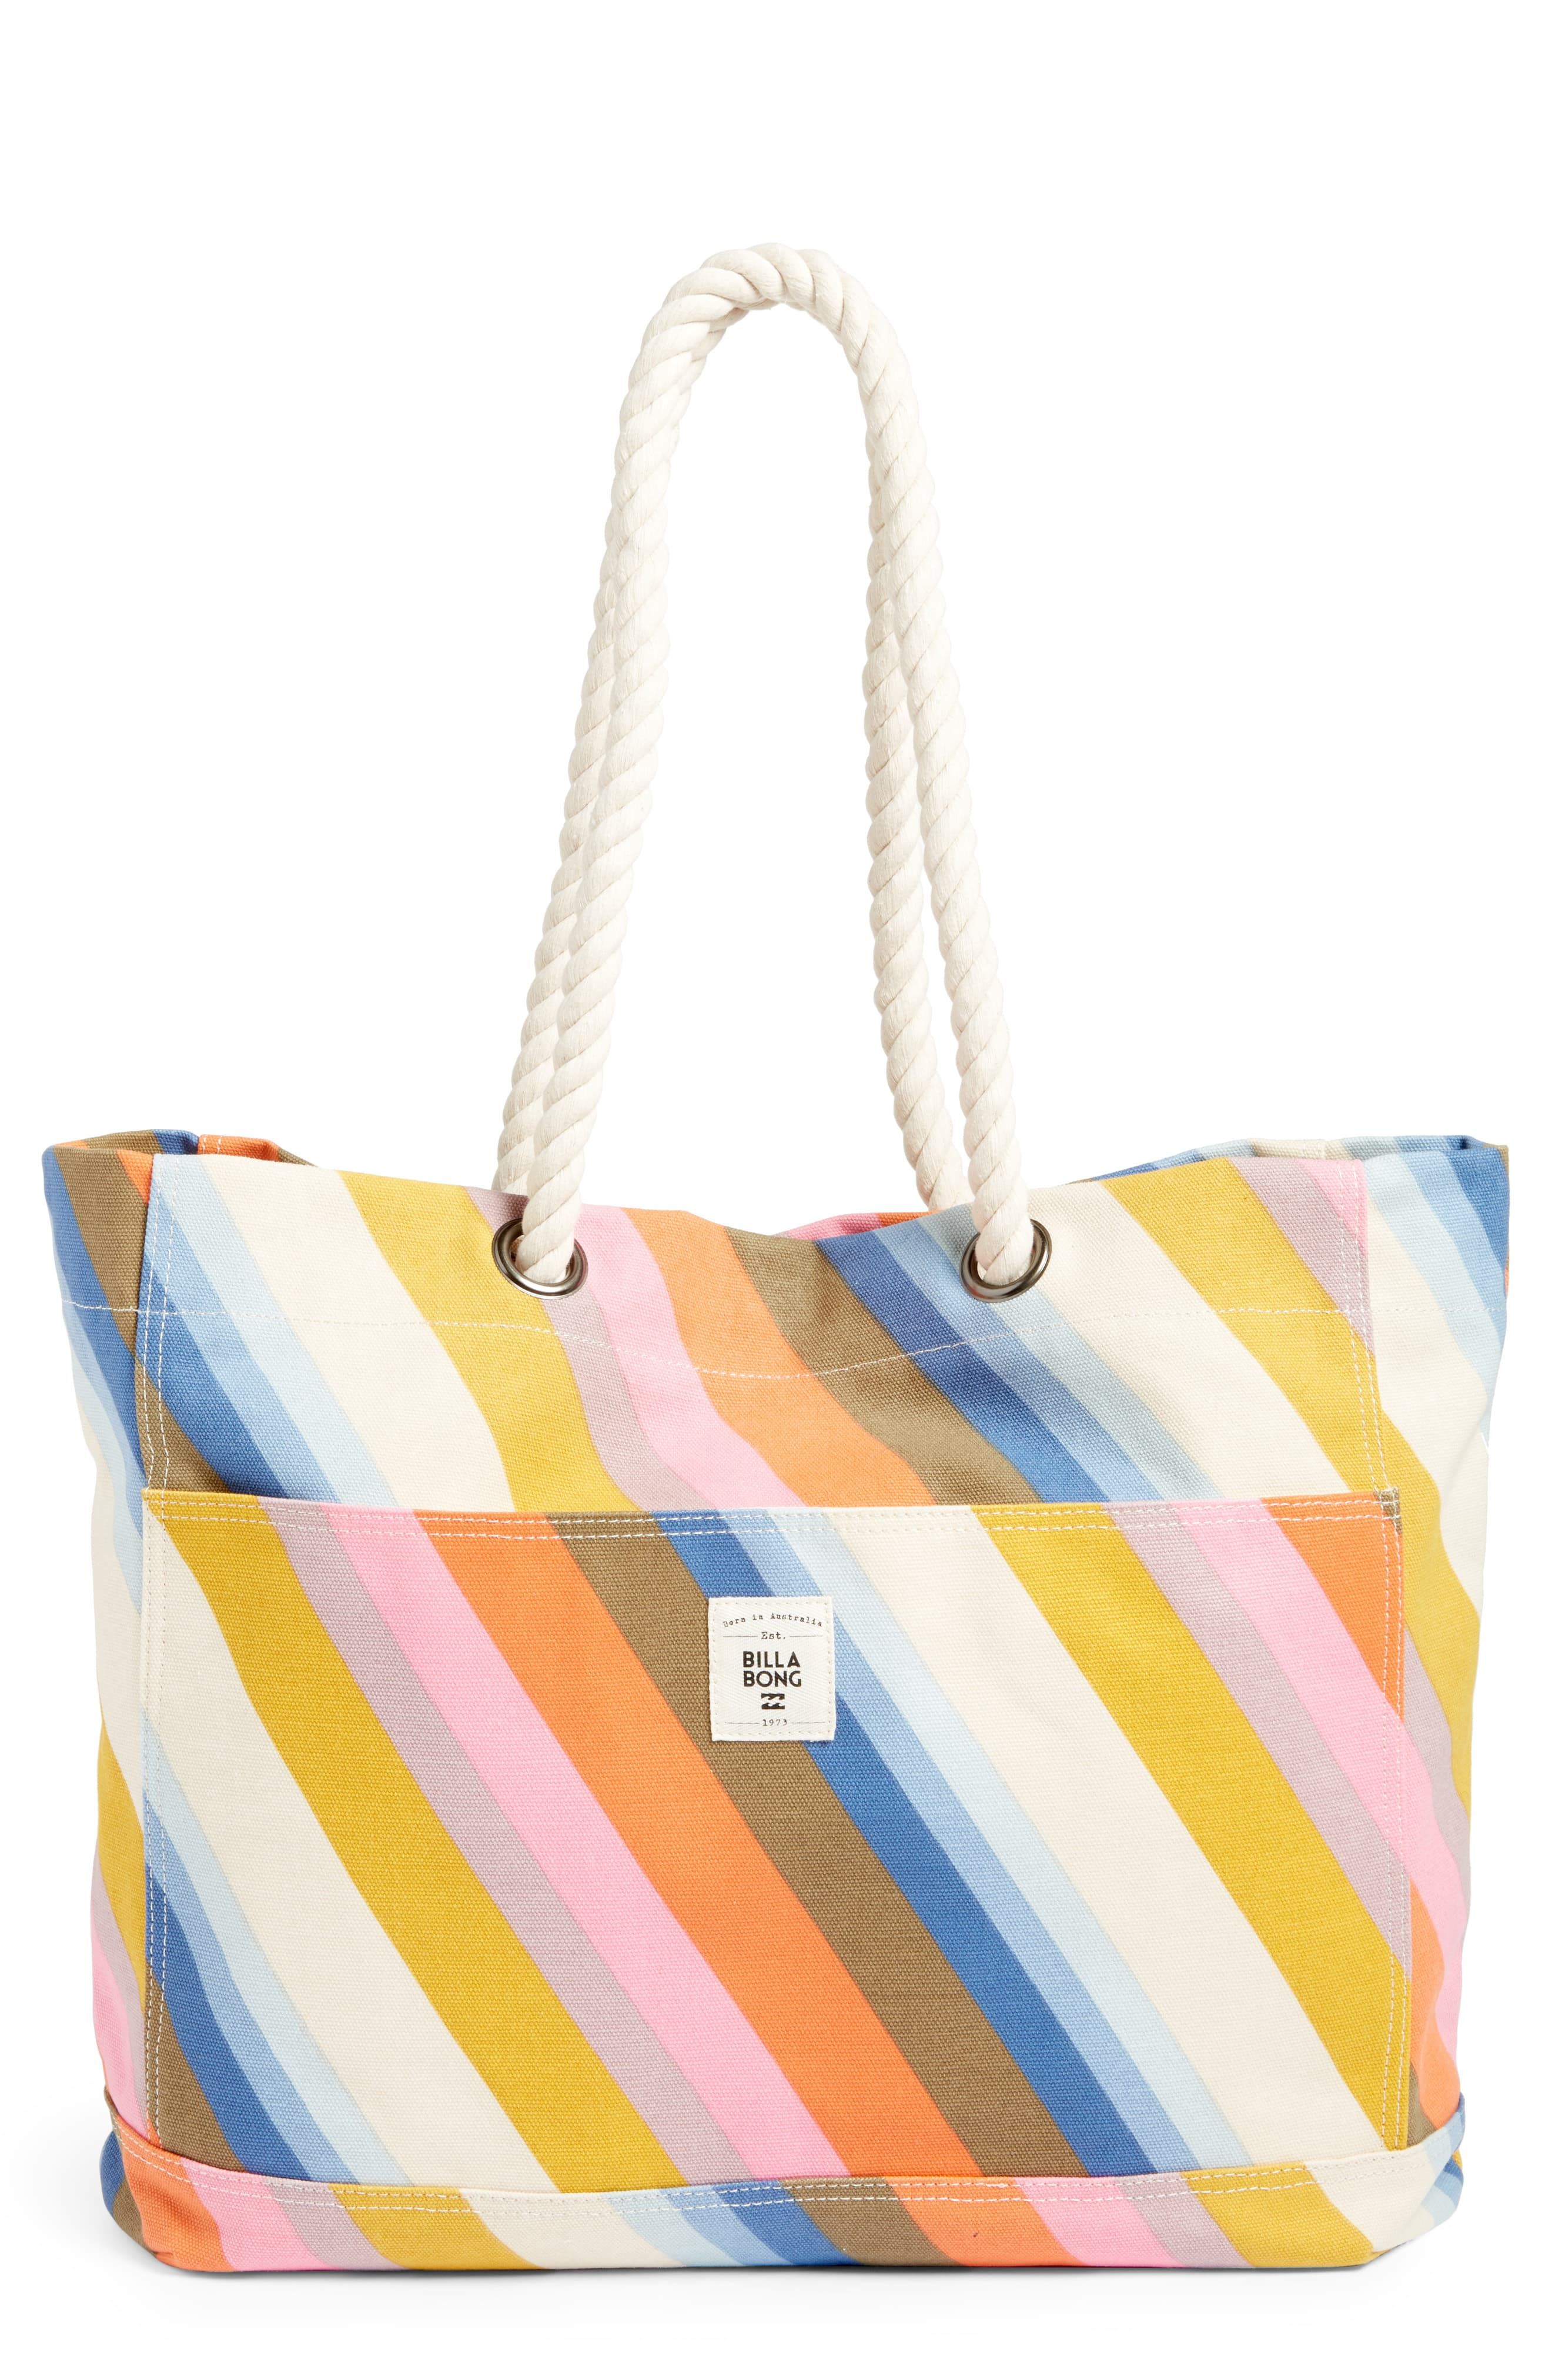 Waterproof Beach Bags and Totes